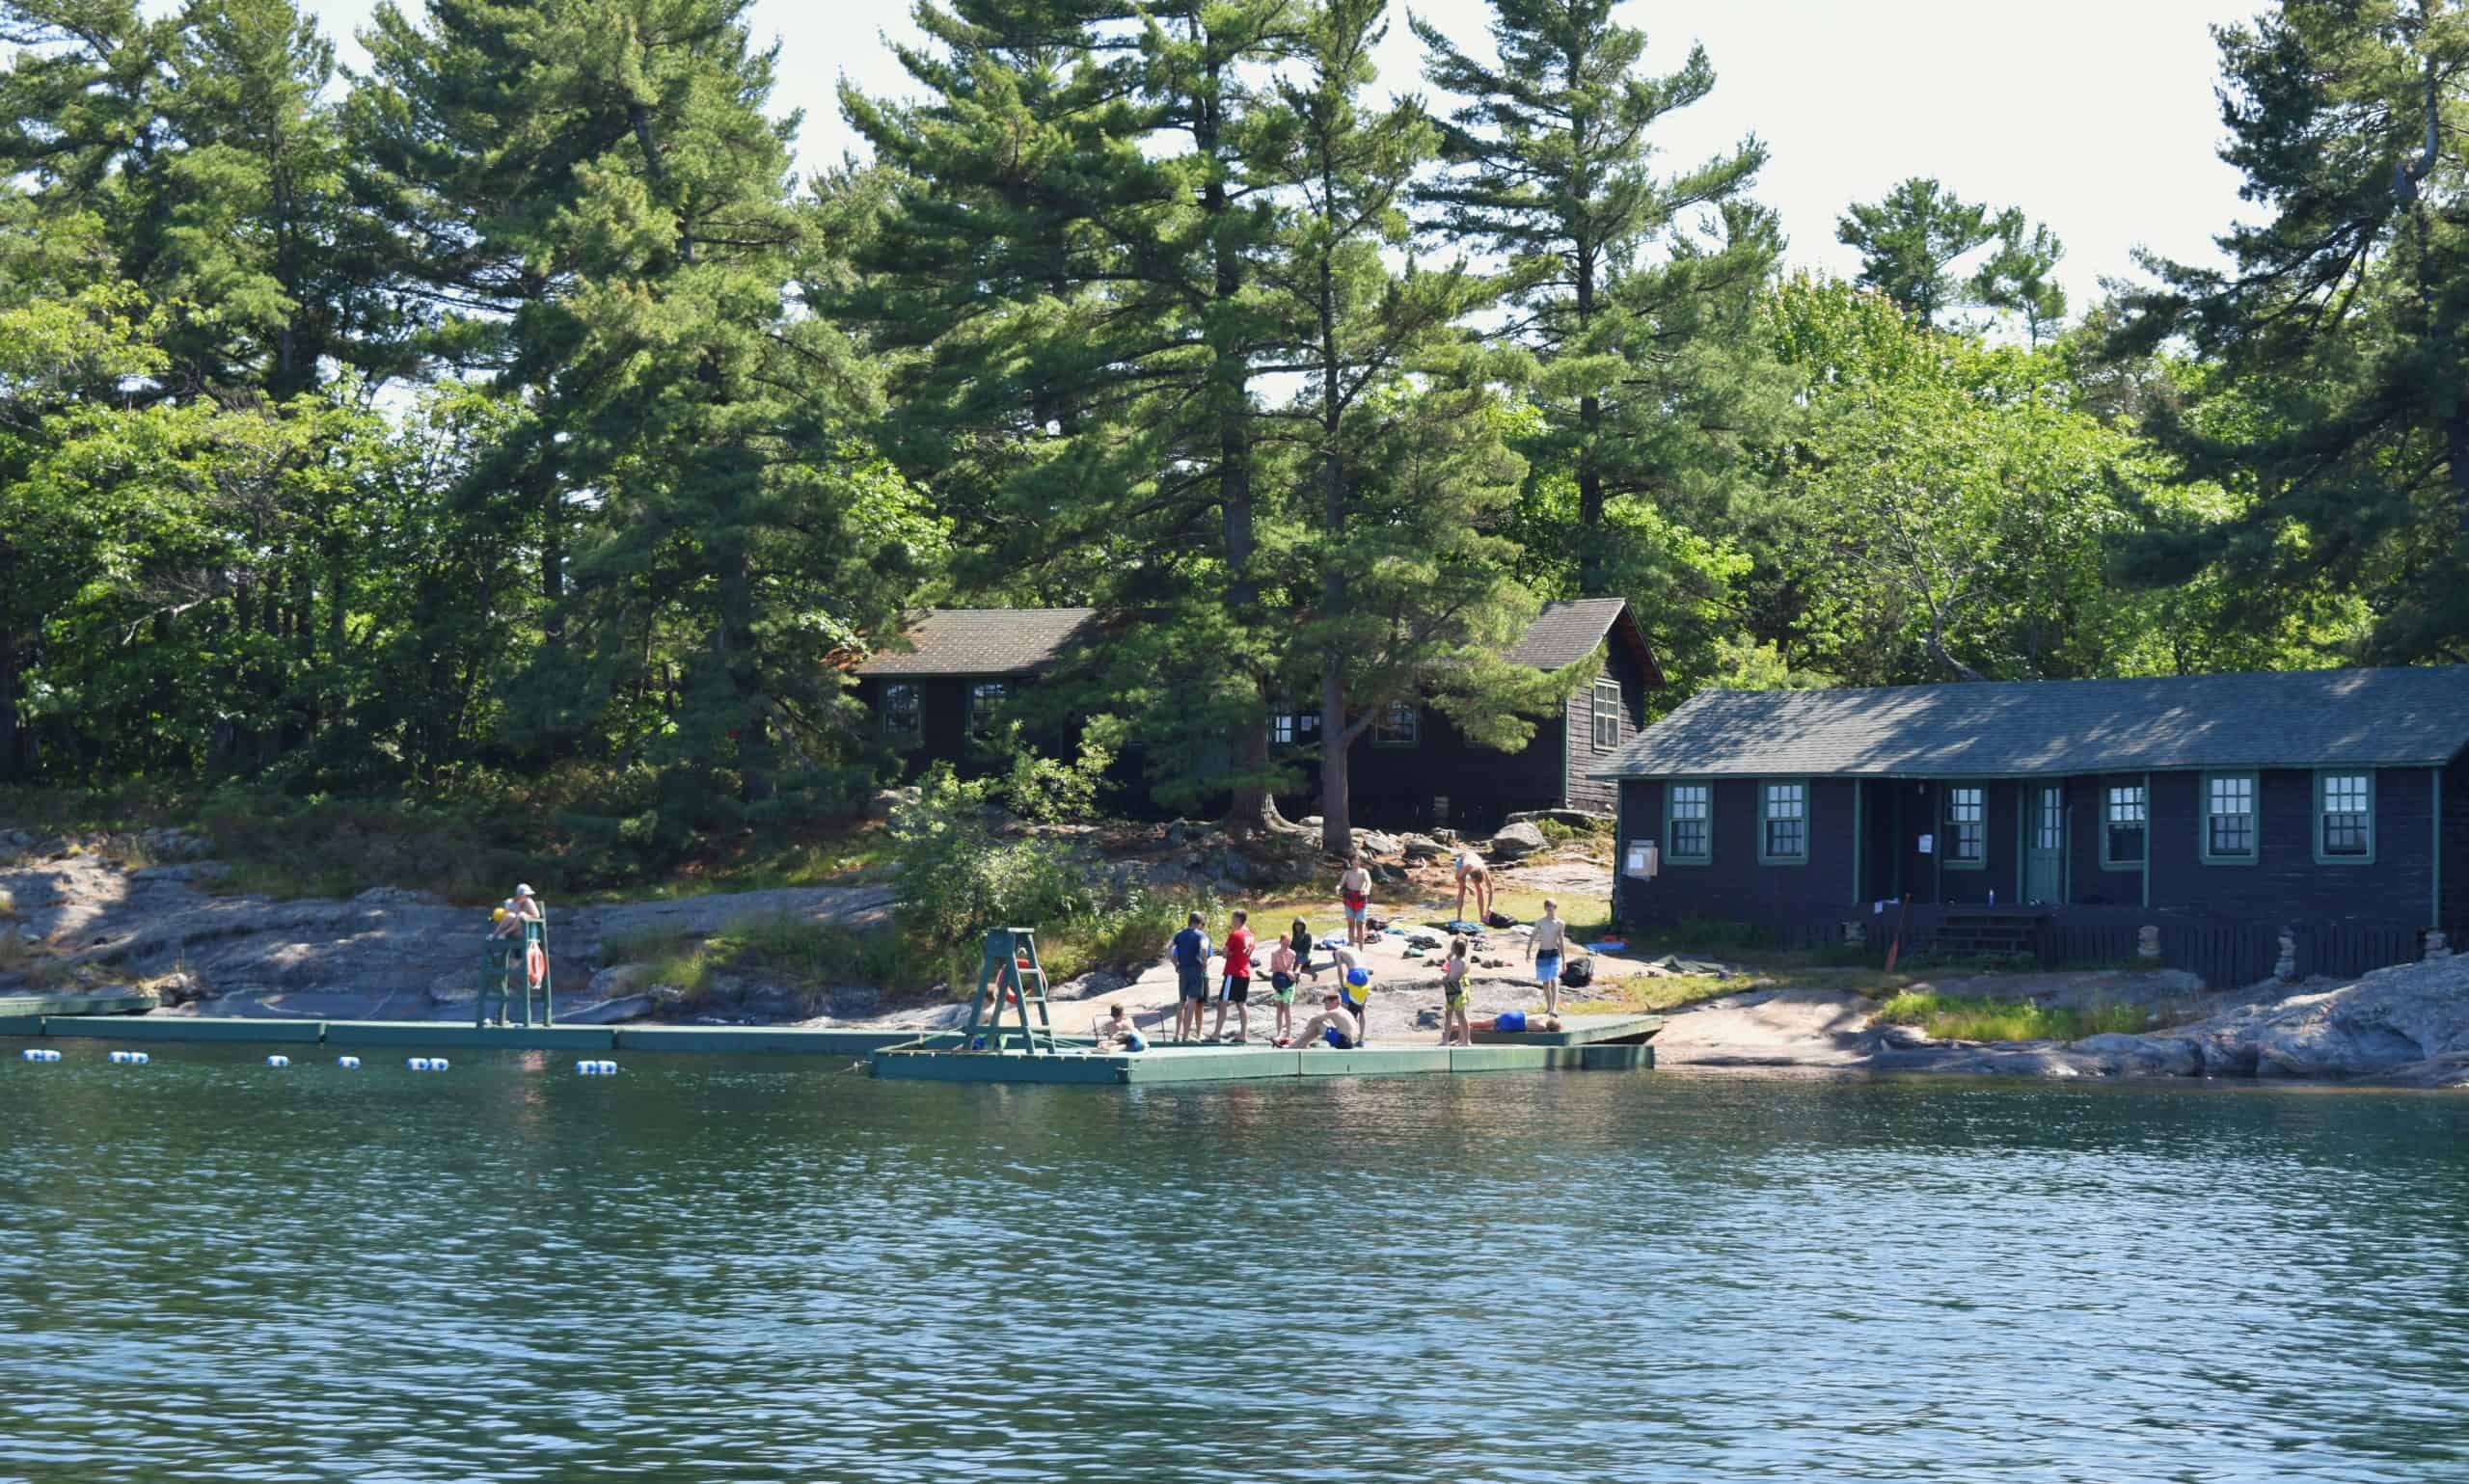 View of Camp Hurontario waterfront with dock and cabins in background